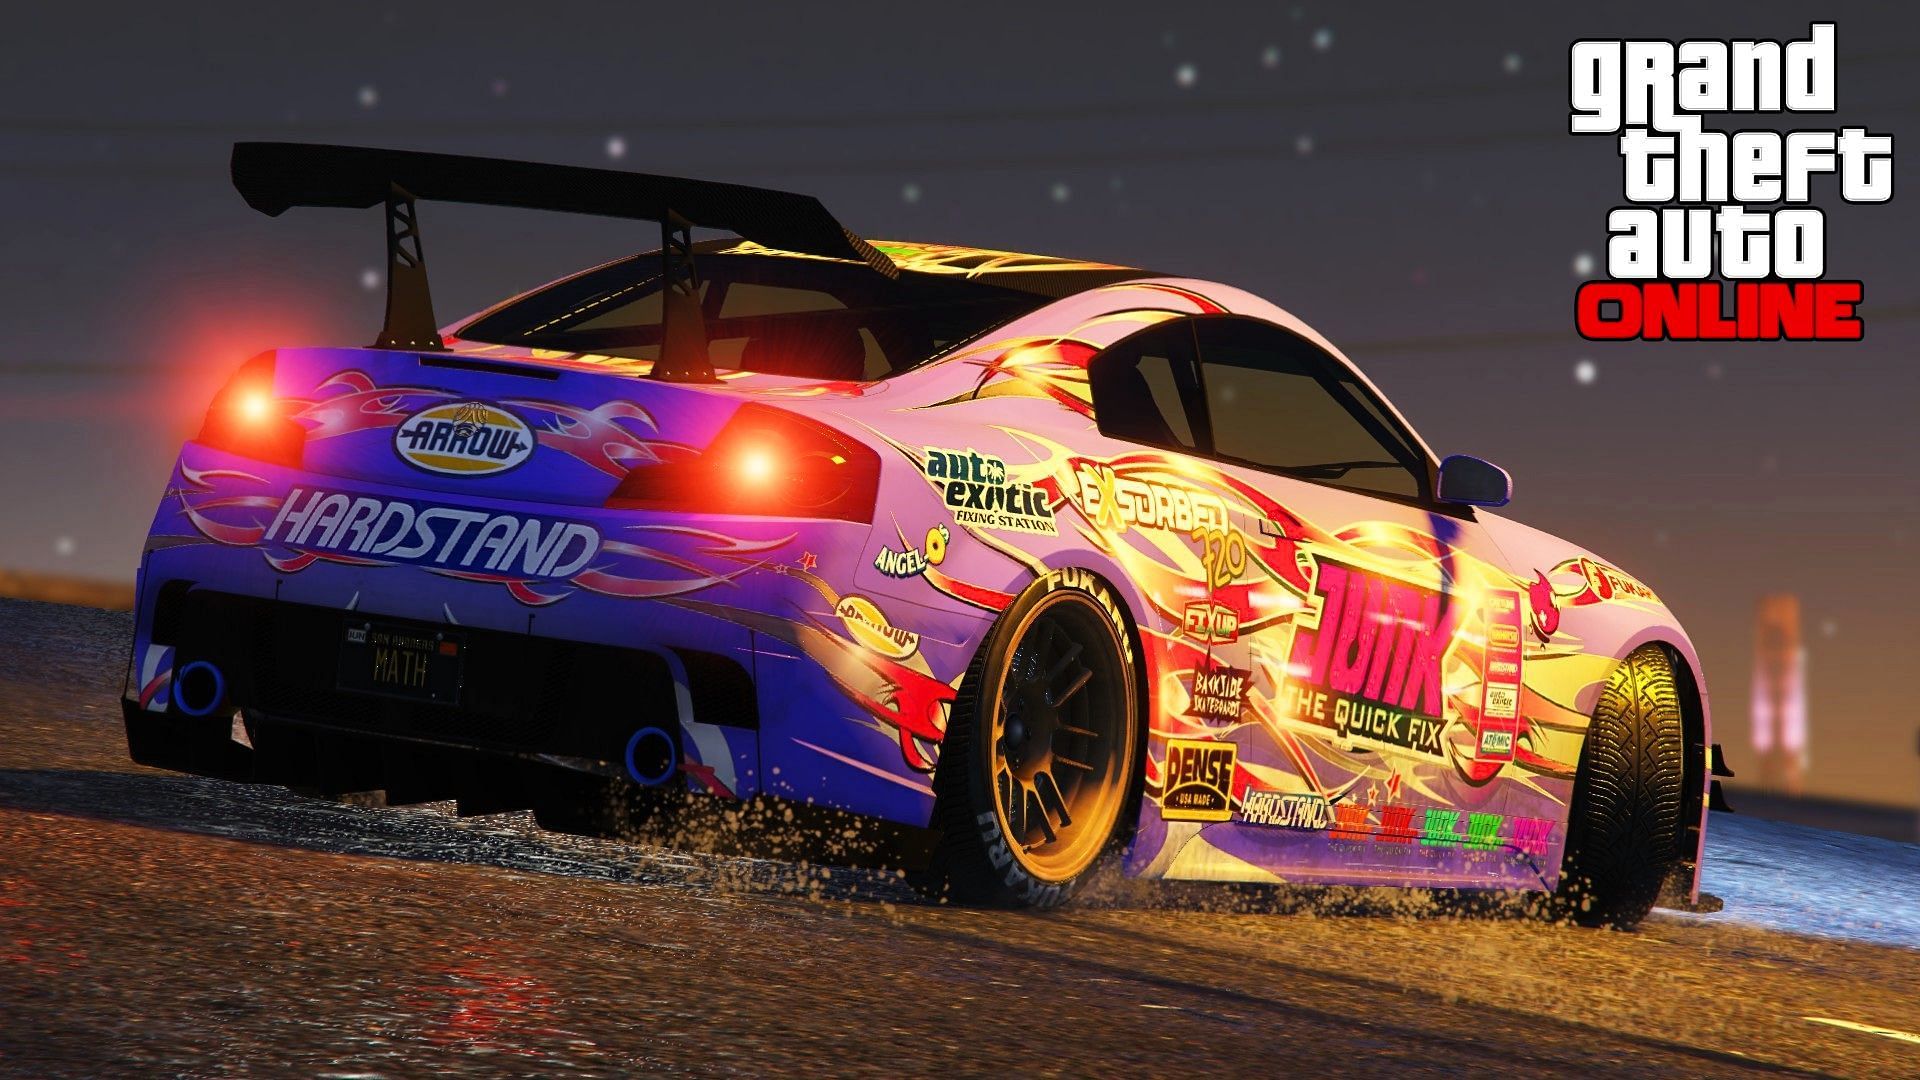 The Fathom FR36 is currently one of the best drift cars in GTA Online (Image via GTA Forums/MathSouza)